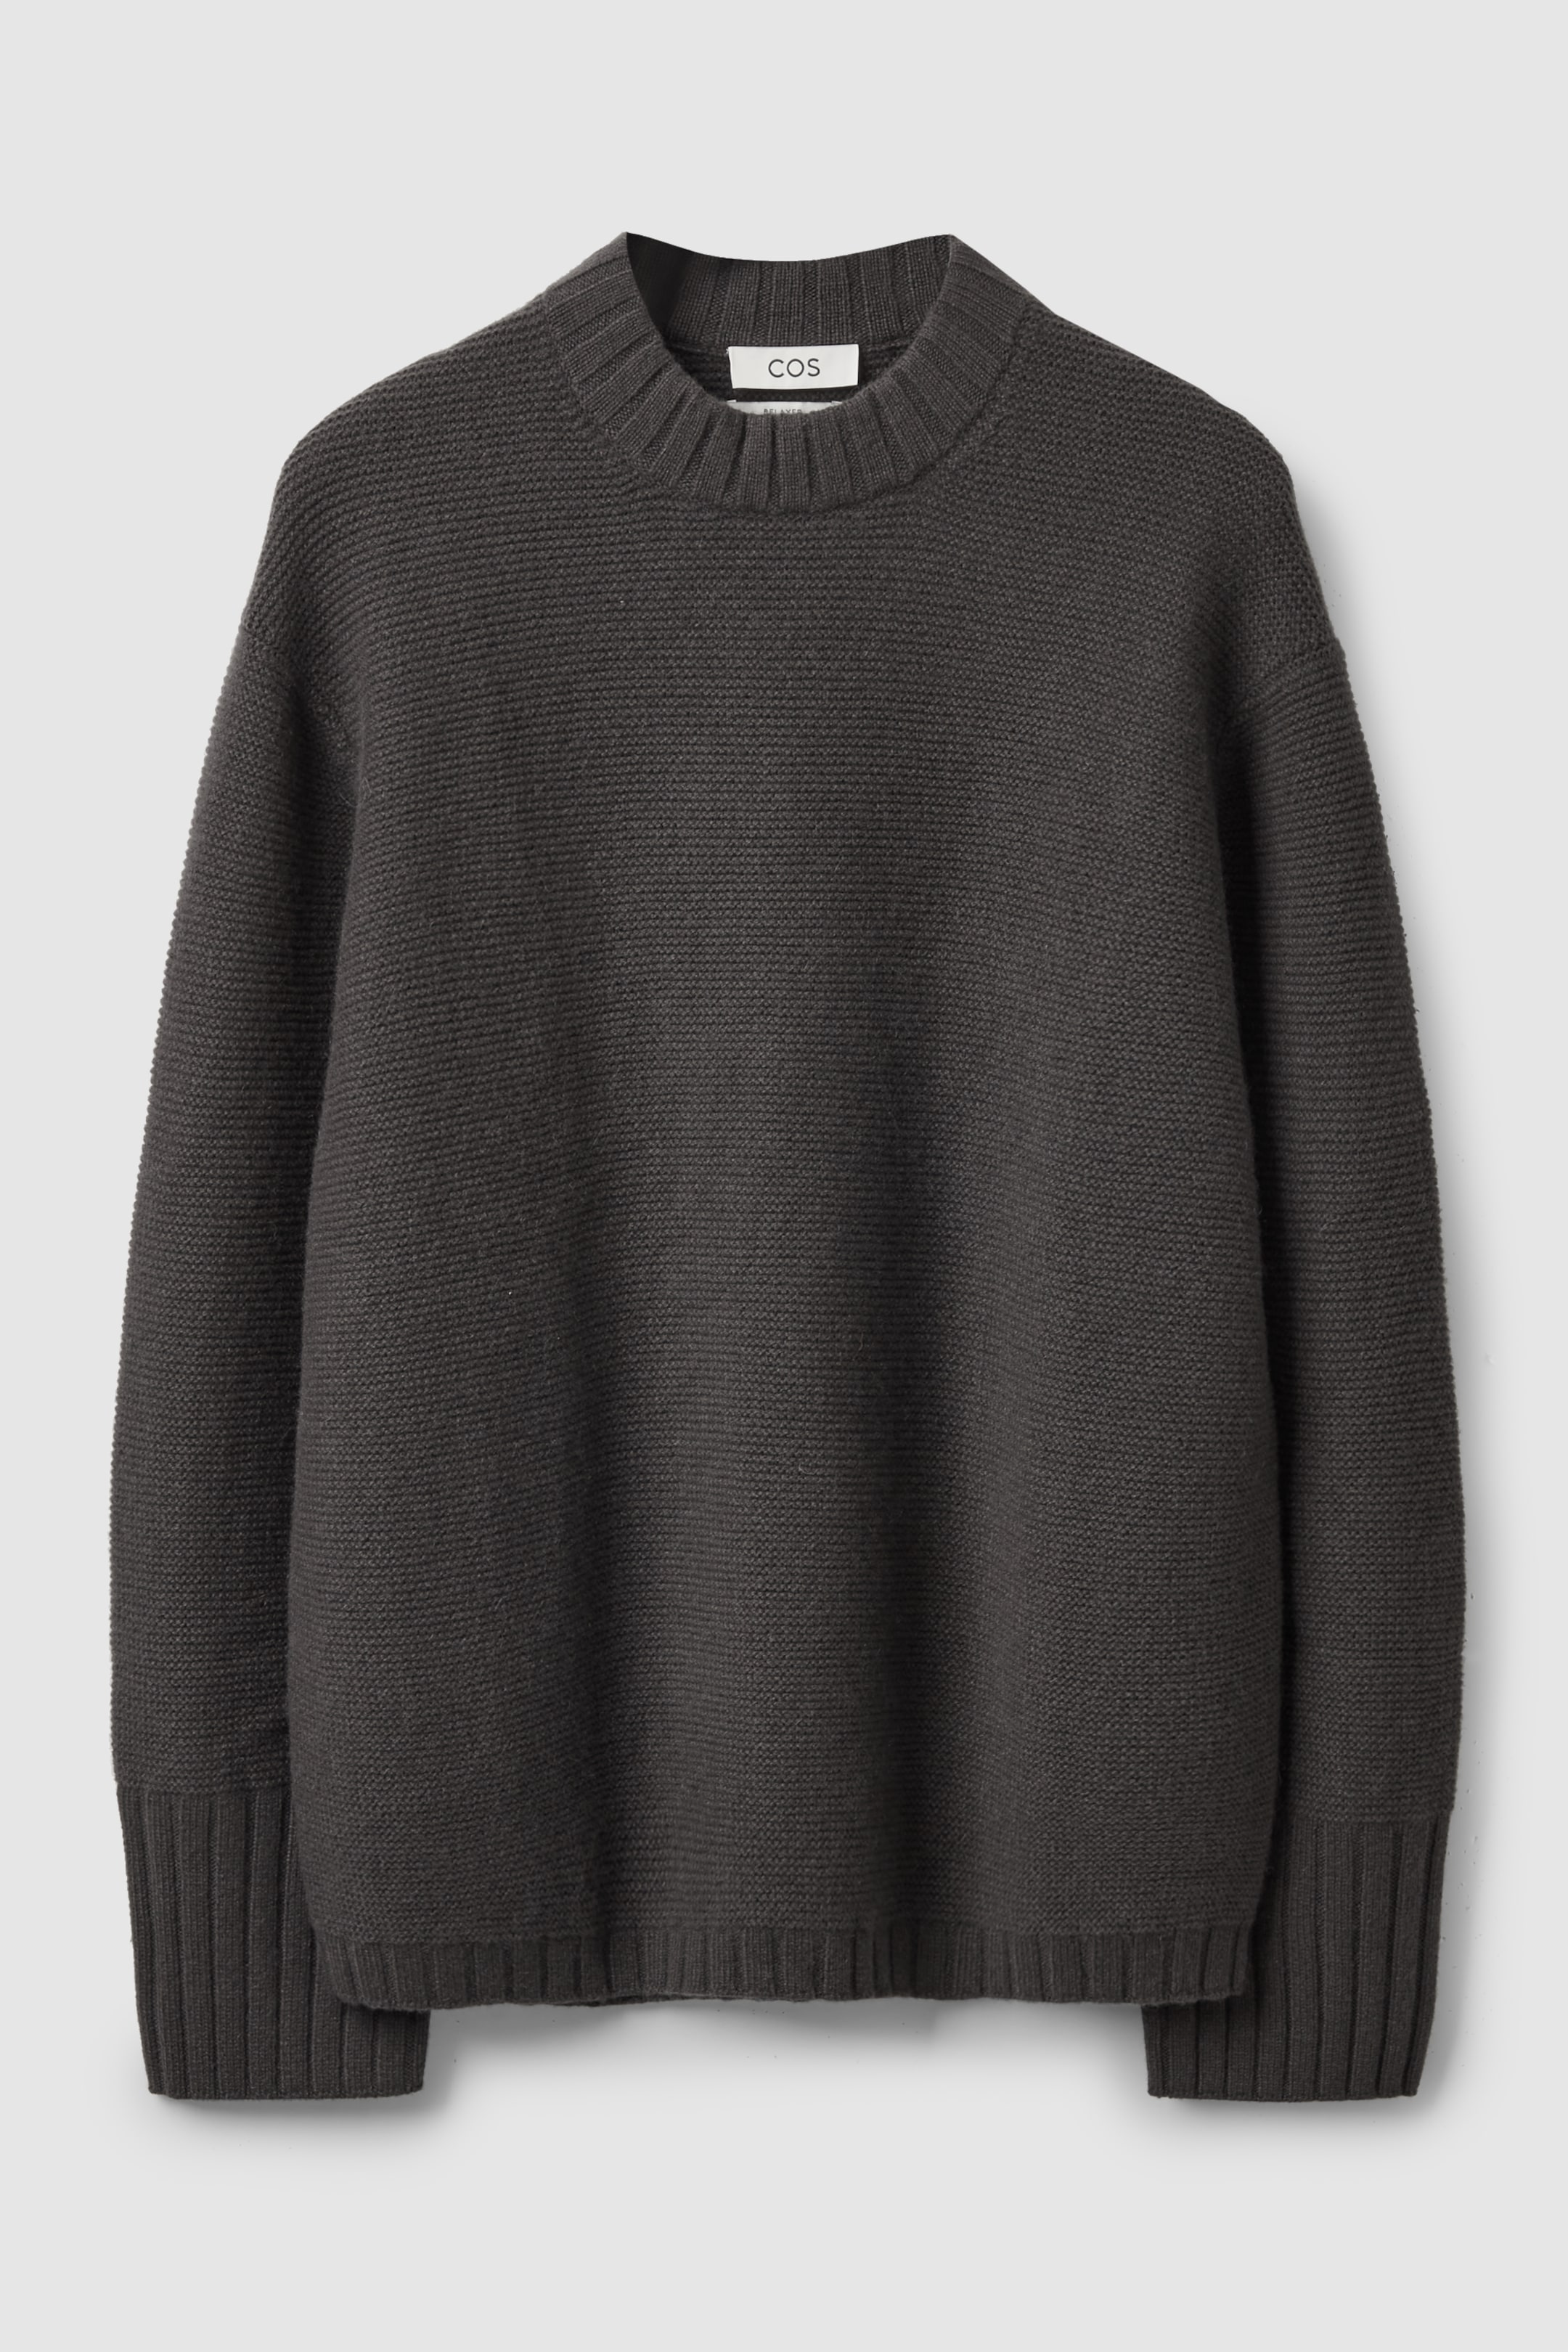 Front image of cos MOCK-NECK PURE CASHMERE JUMPER in DARK GREY